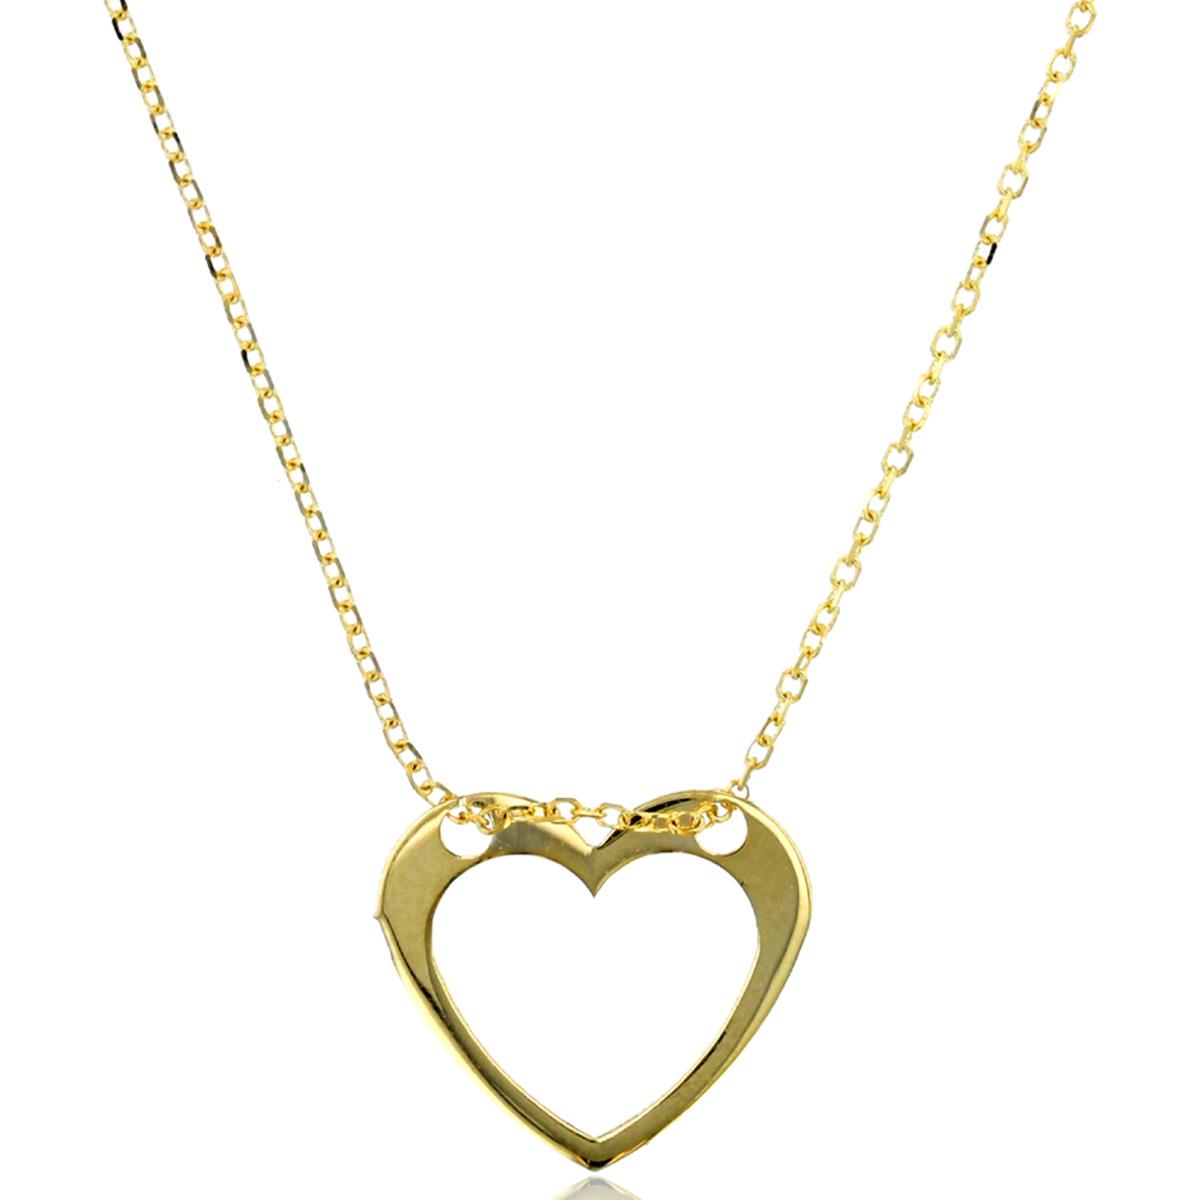 14K Yellow Gold Polished Open Heart Charm 15+1" Necklace with Passion Plate